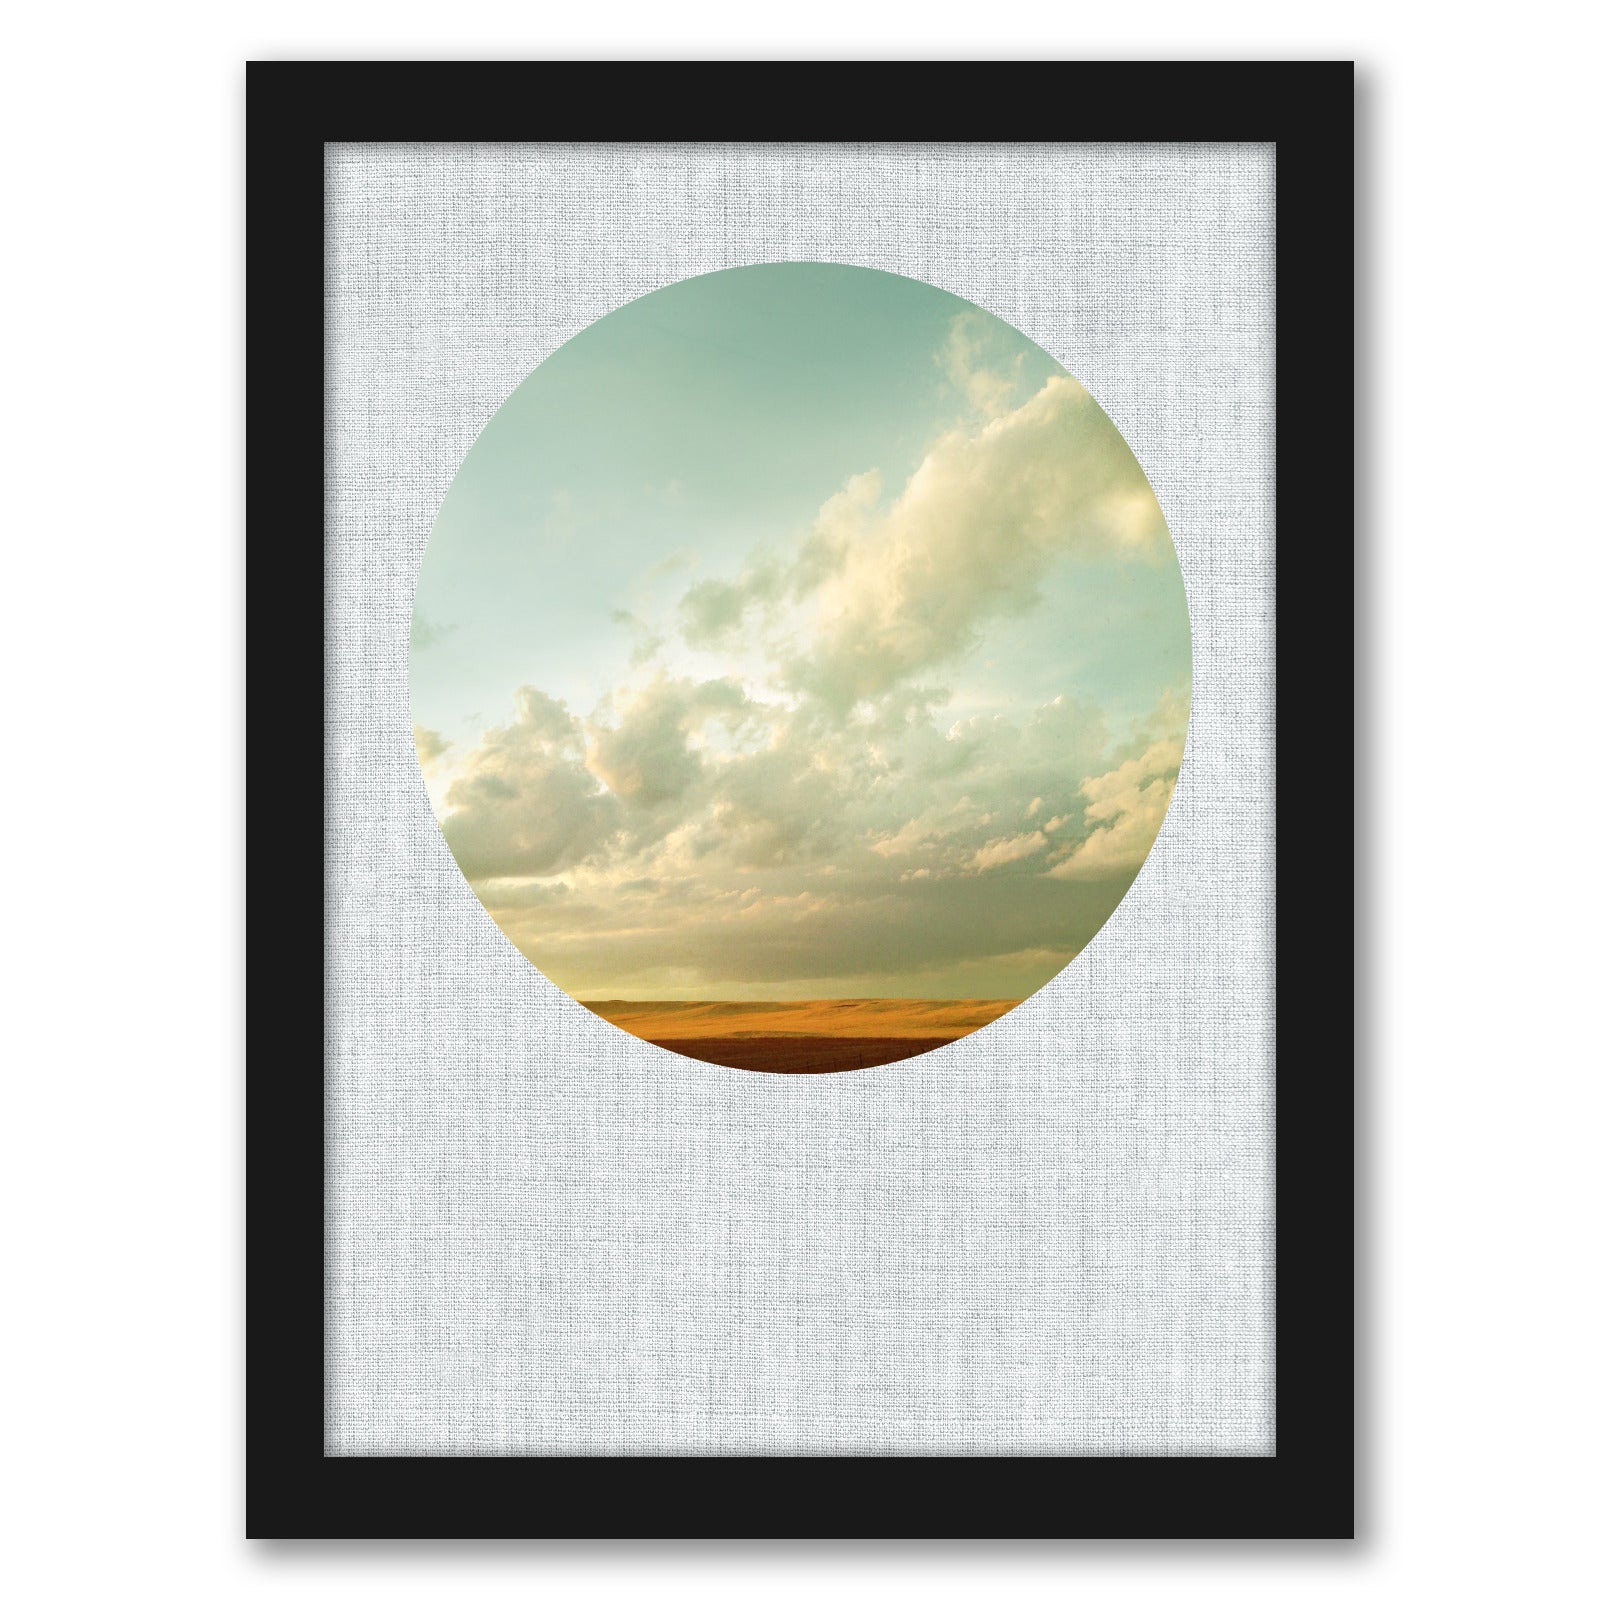 Dirt Road Sunset by Annie Bailey - Framed Print - Americanflat